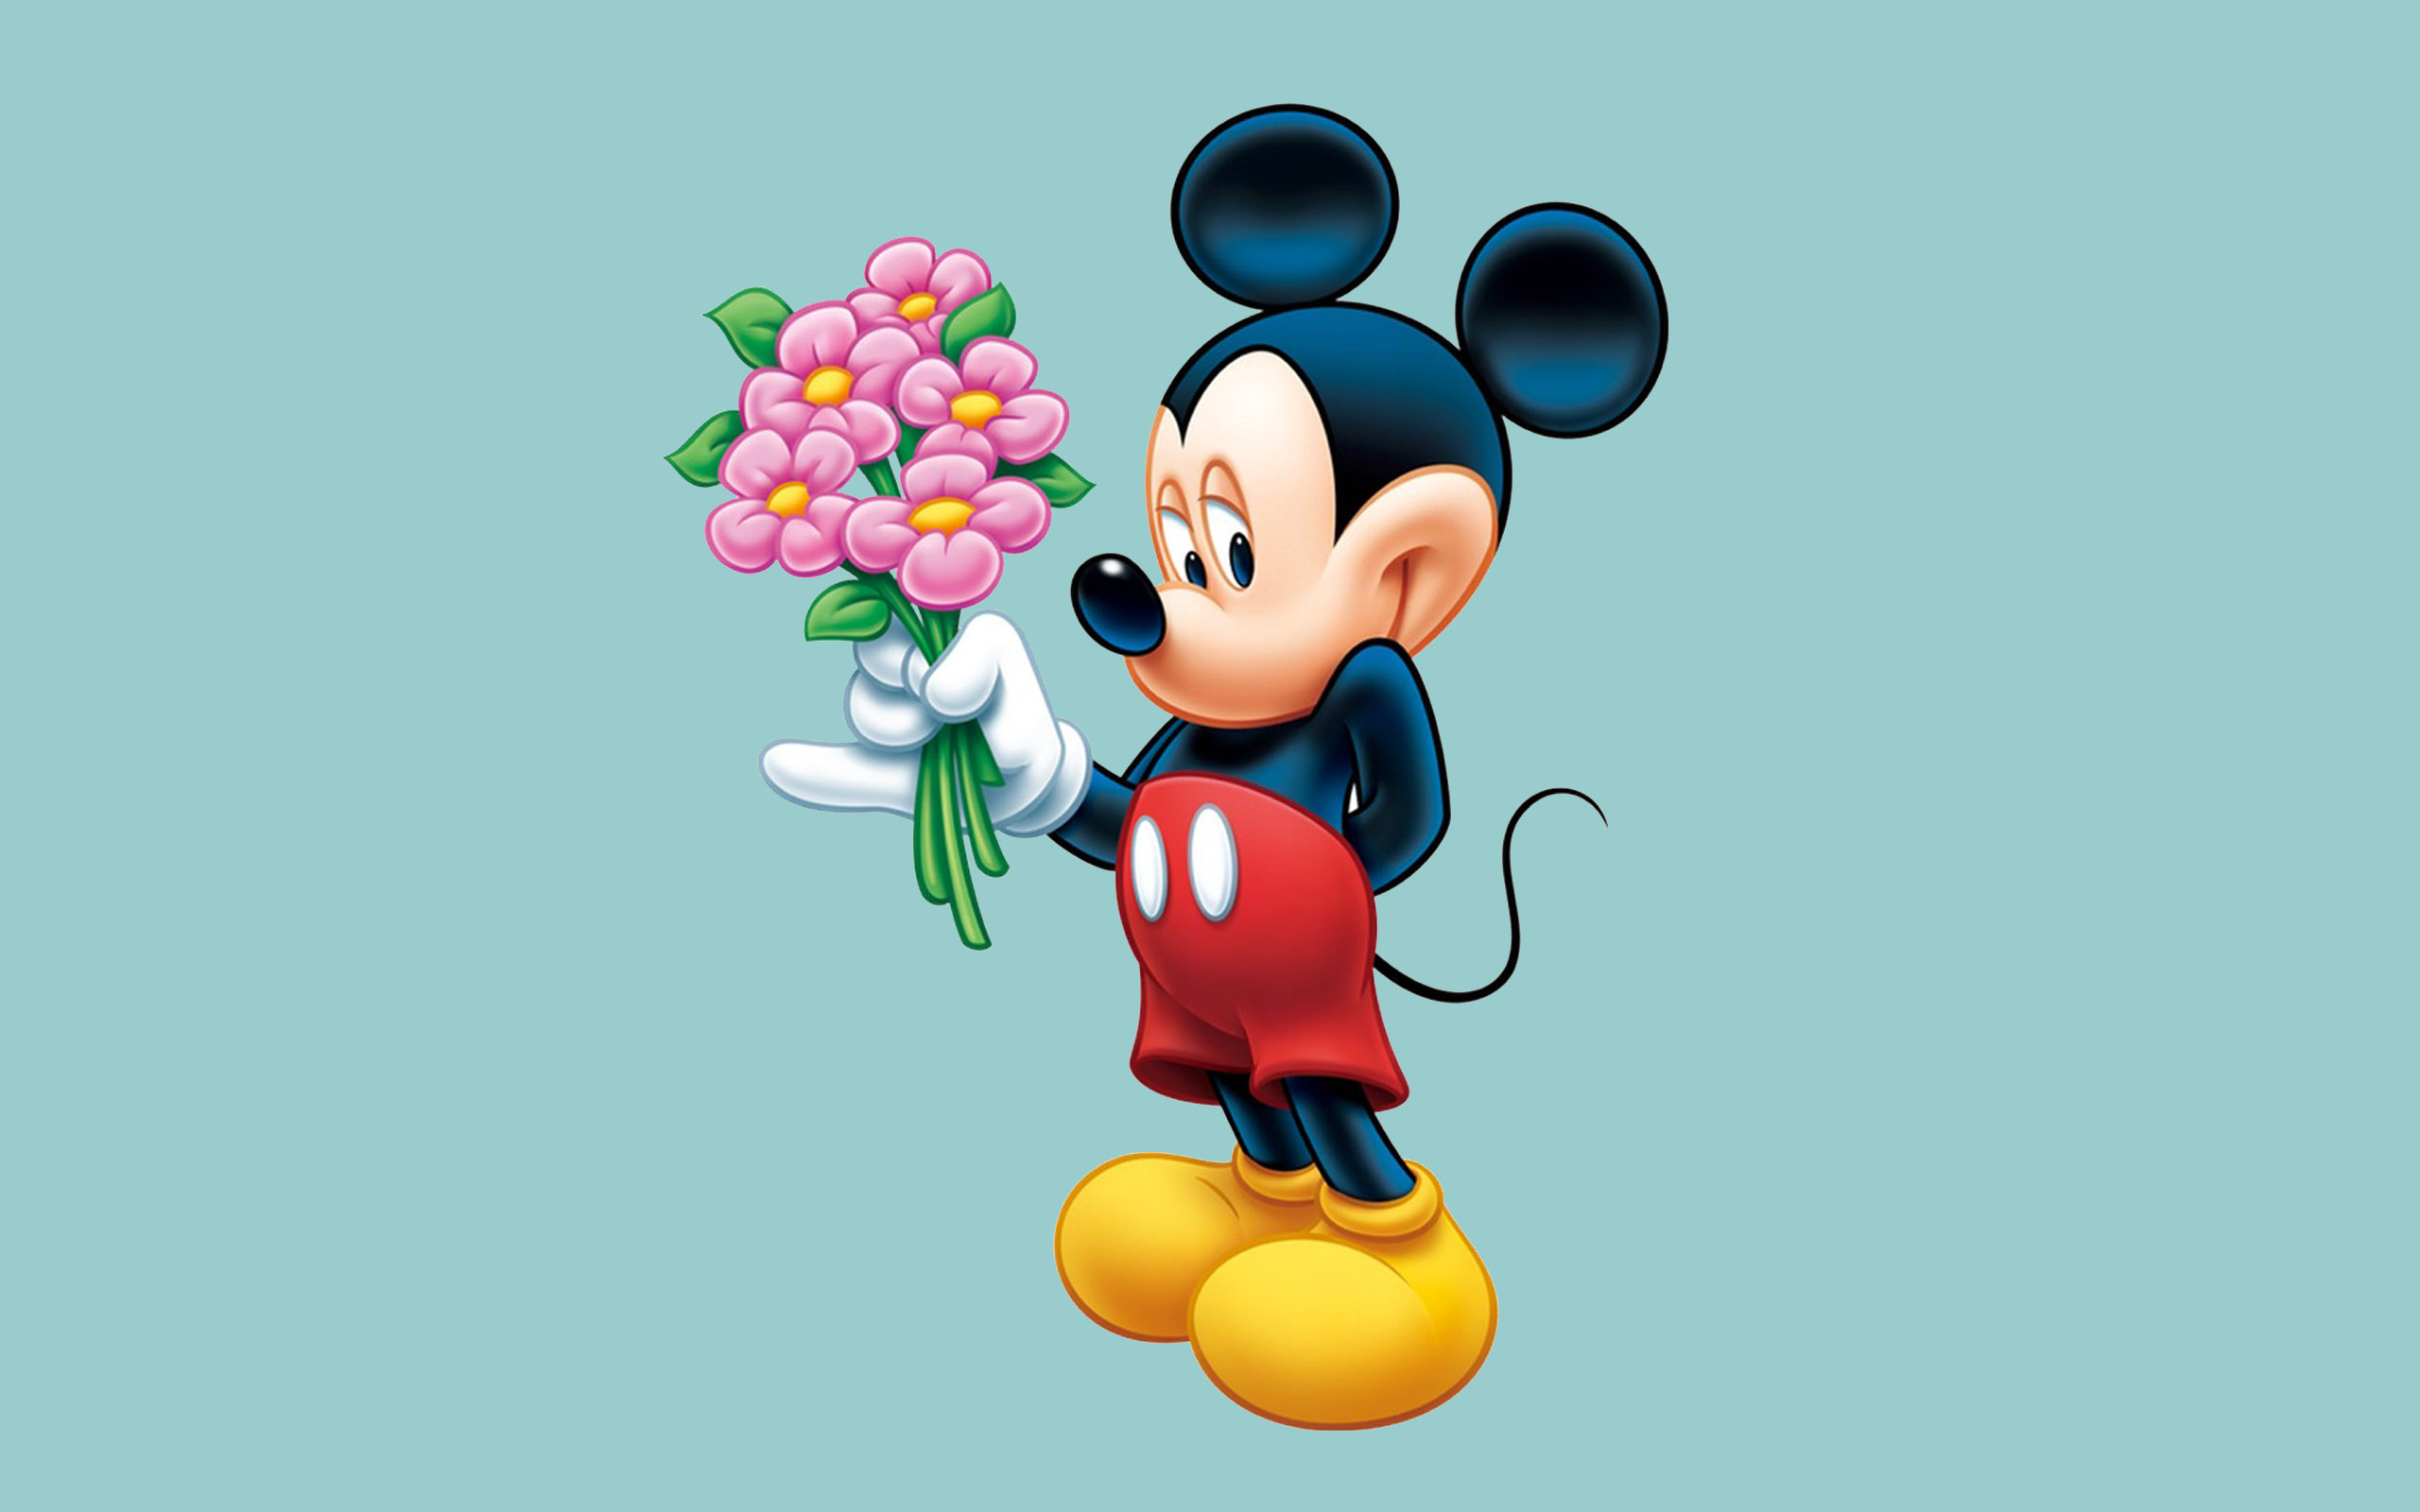 Mickey Mouse in high definition, Flash sale offer, Stunning images, 2560x1600 HD Desktop